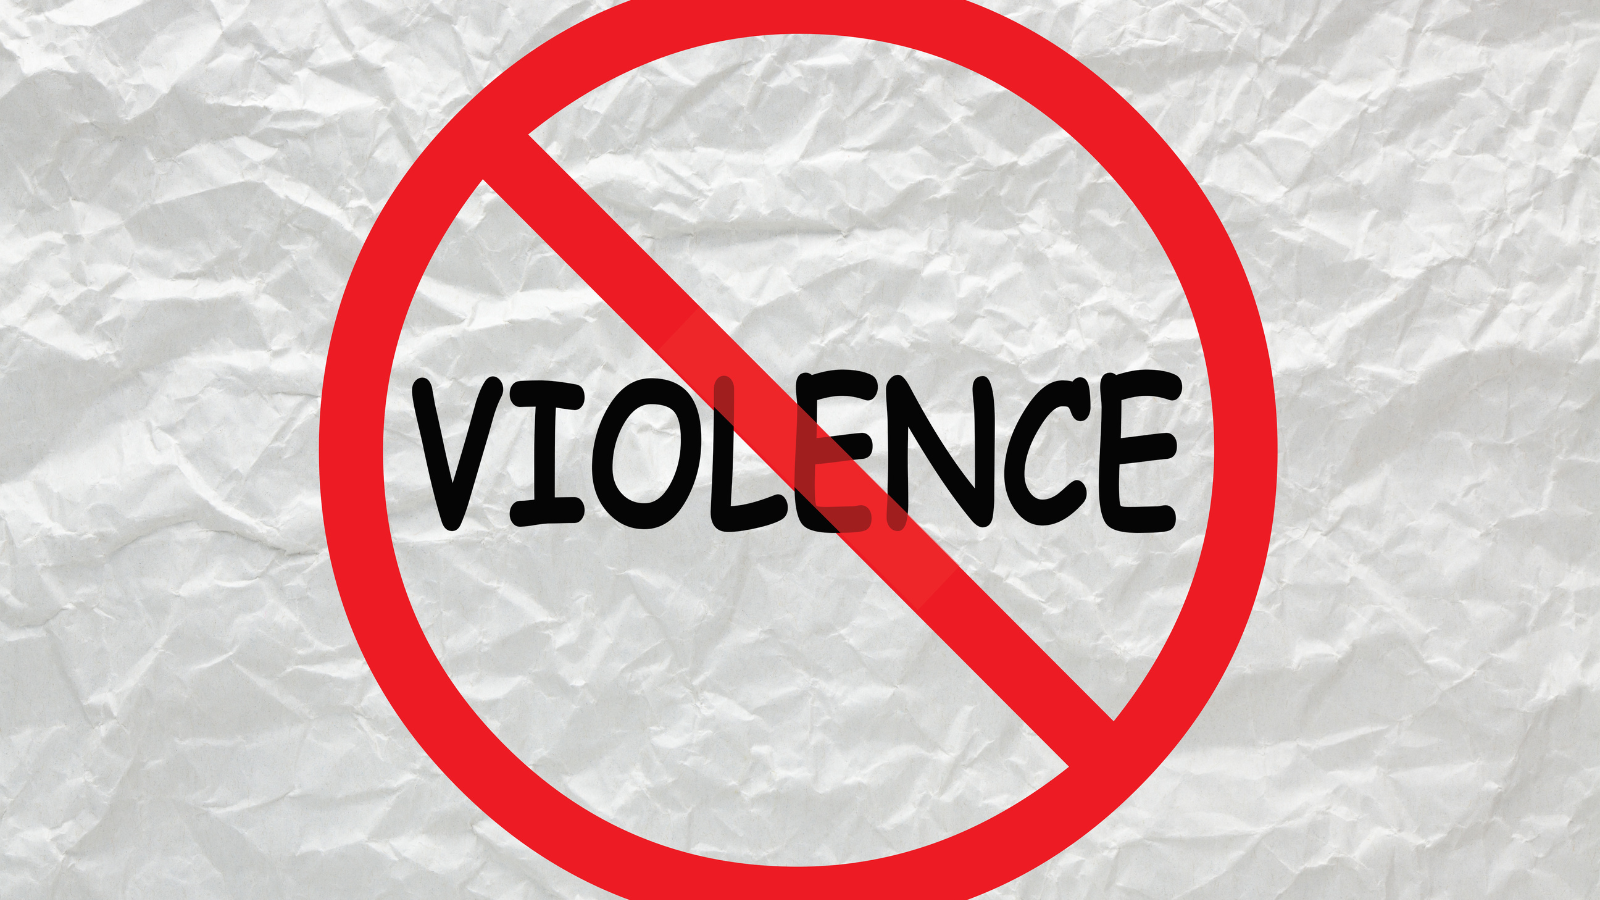 the word 'violence' in a red prohibited symbol